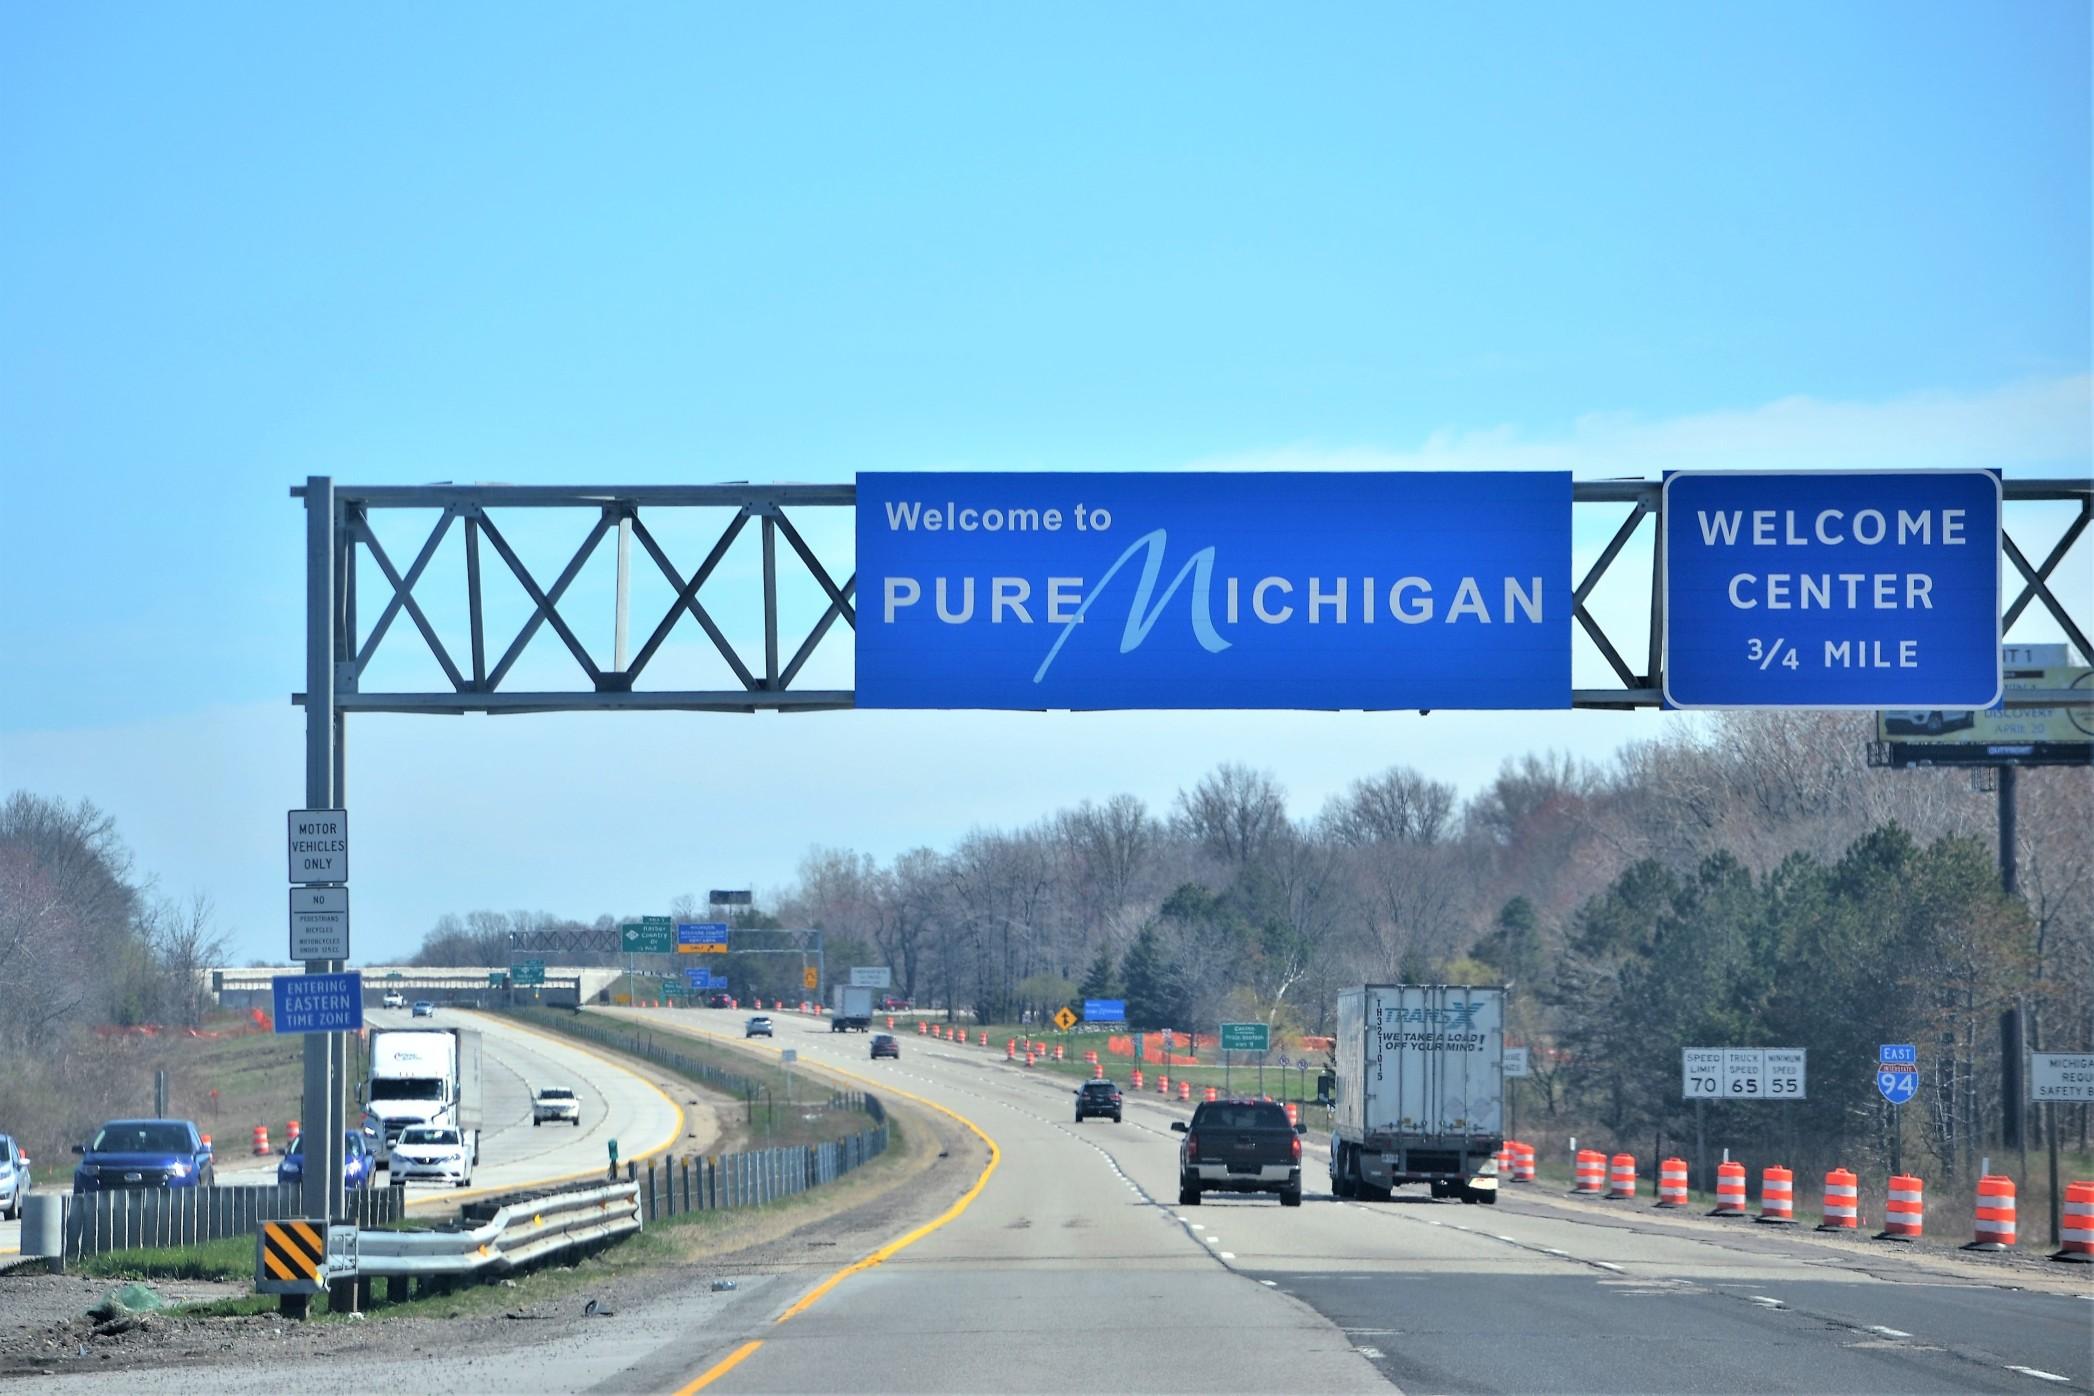 Michigan is home to some of the highest car insurance rates in the country.